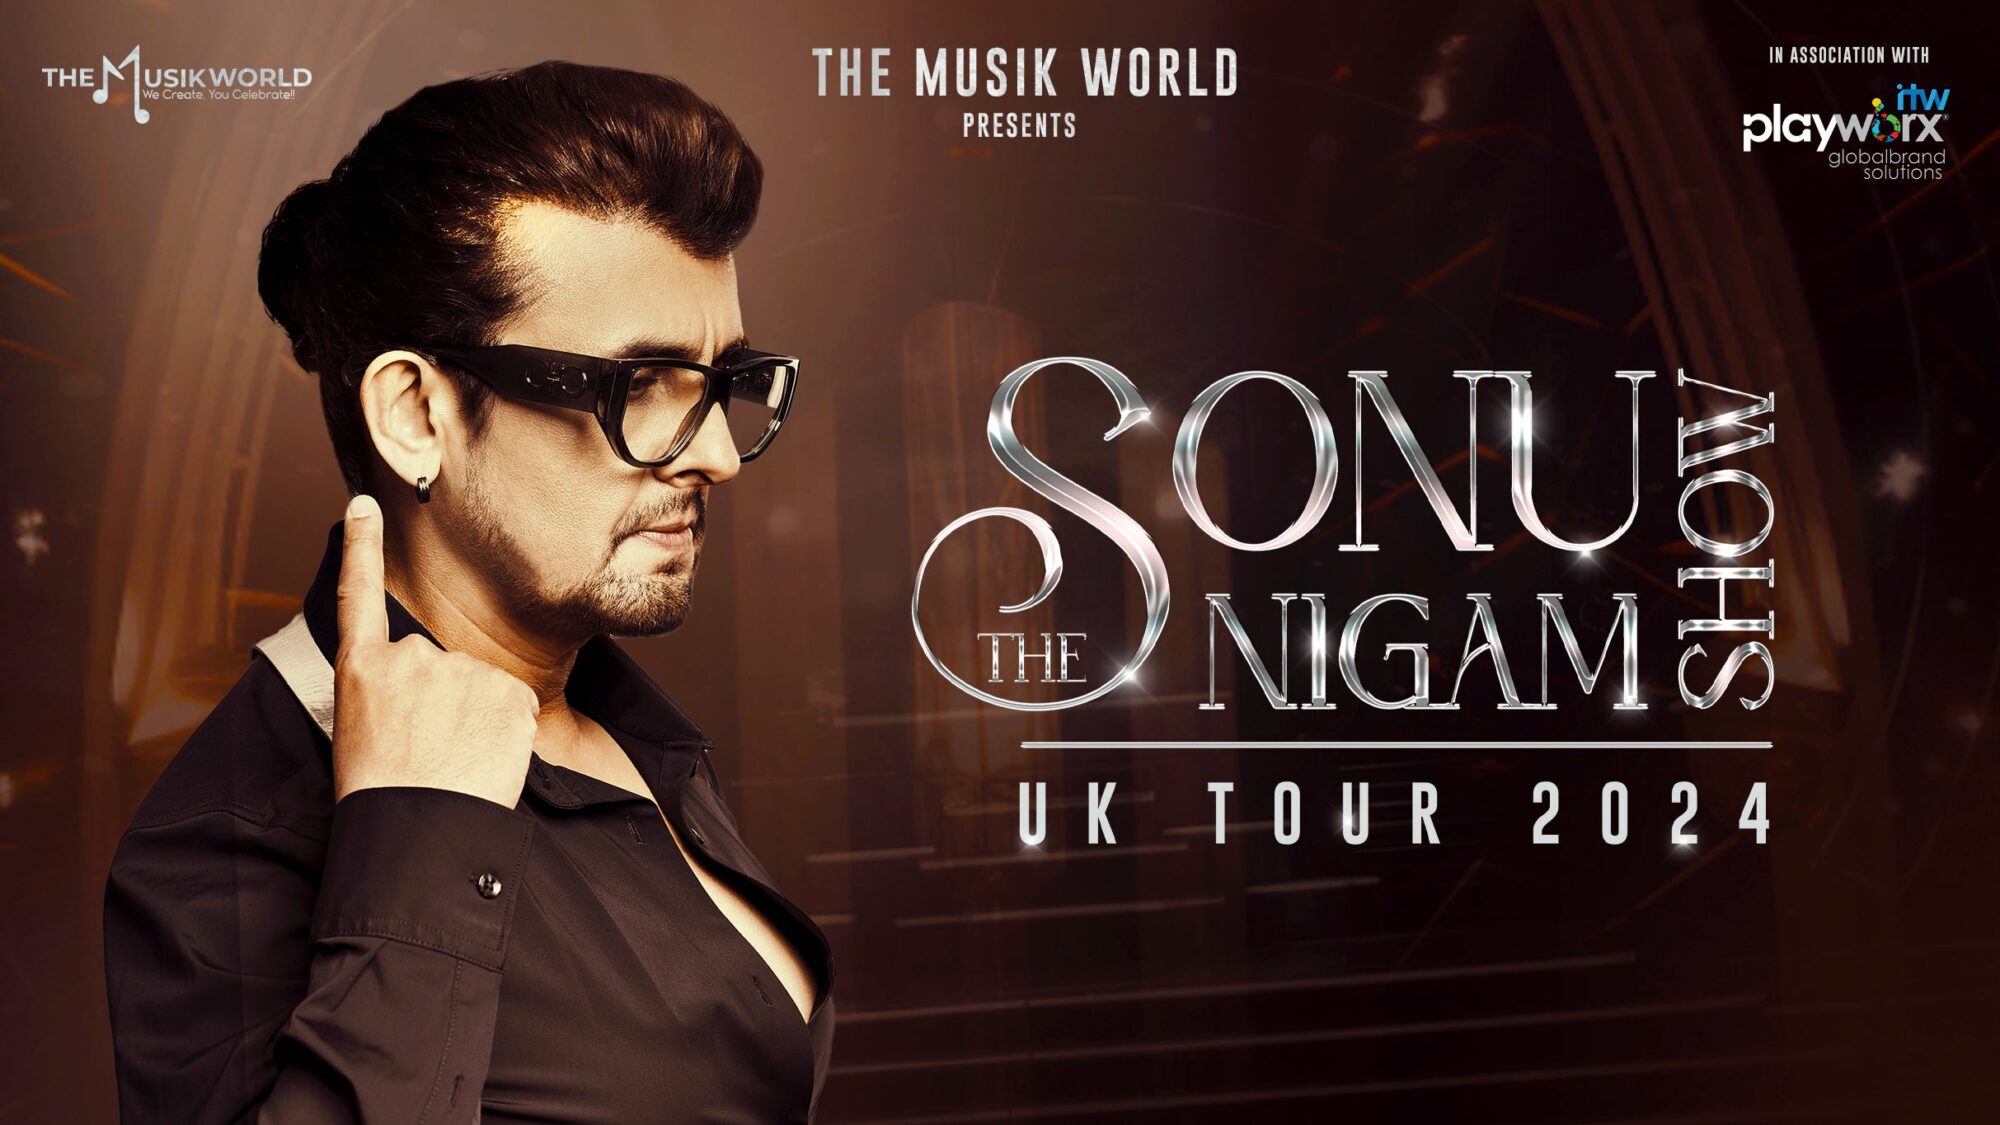 Image name Sonu Nigam at First Direct Arena Leeds the 1 image from the post Sonu Nigam - Premium Package - Suites at First Direct Arena, Leeds in Yorkshire.com.